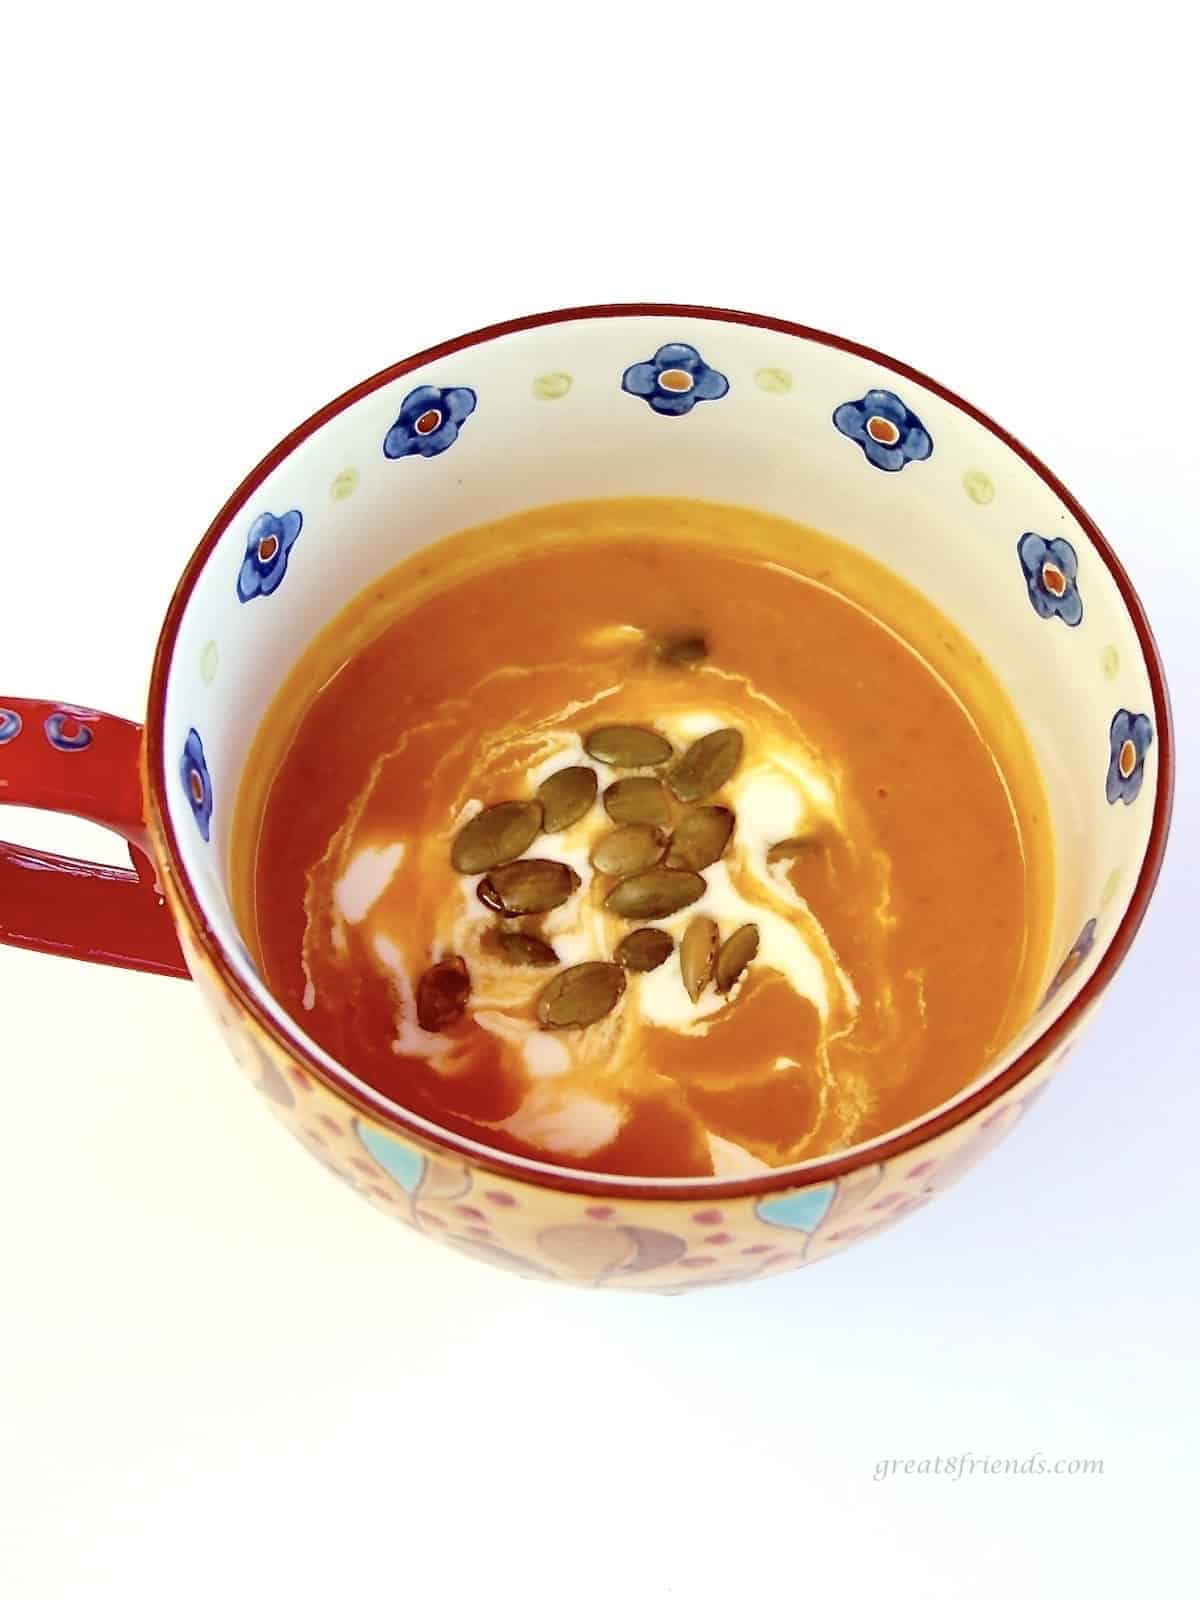 Colorful cup of pumpkin soup with crema and pepitas sprinkled on top.